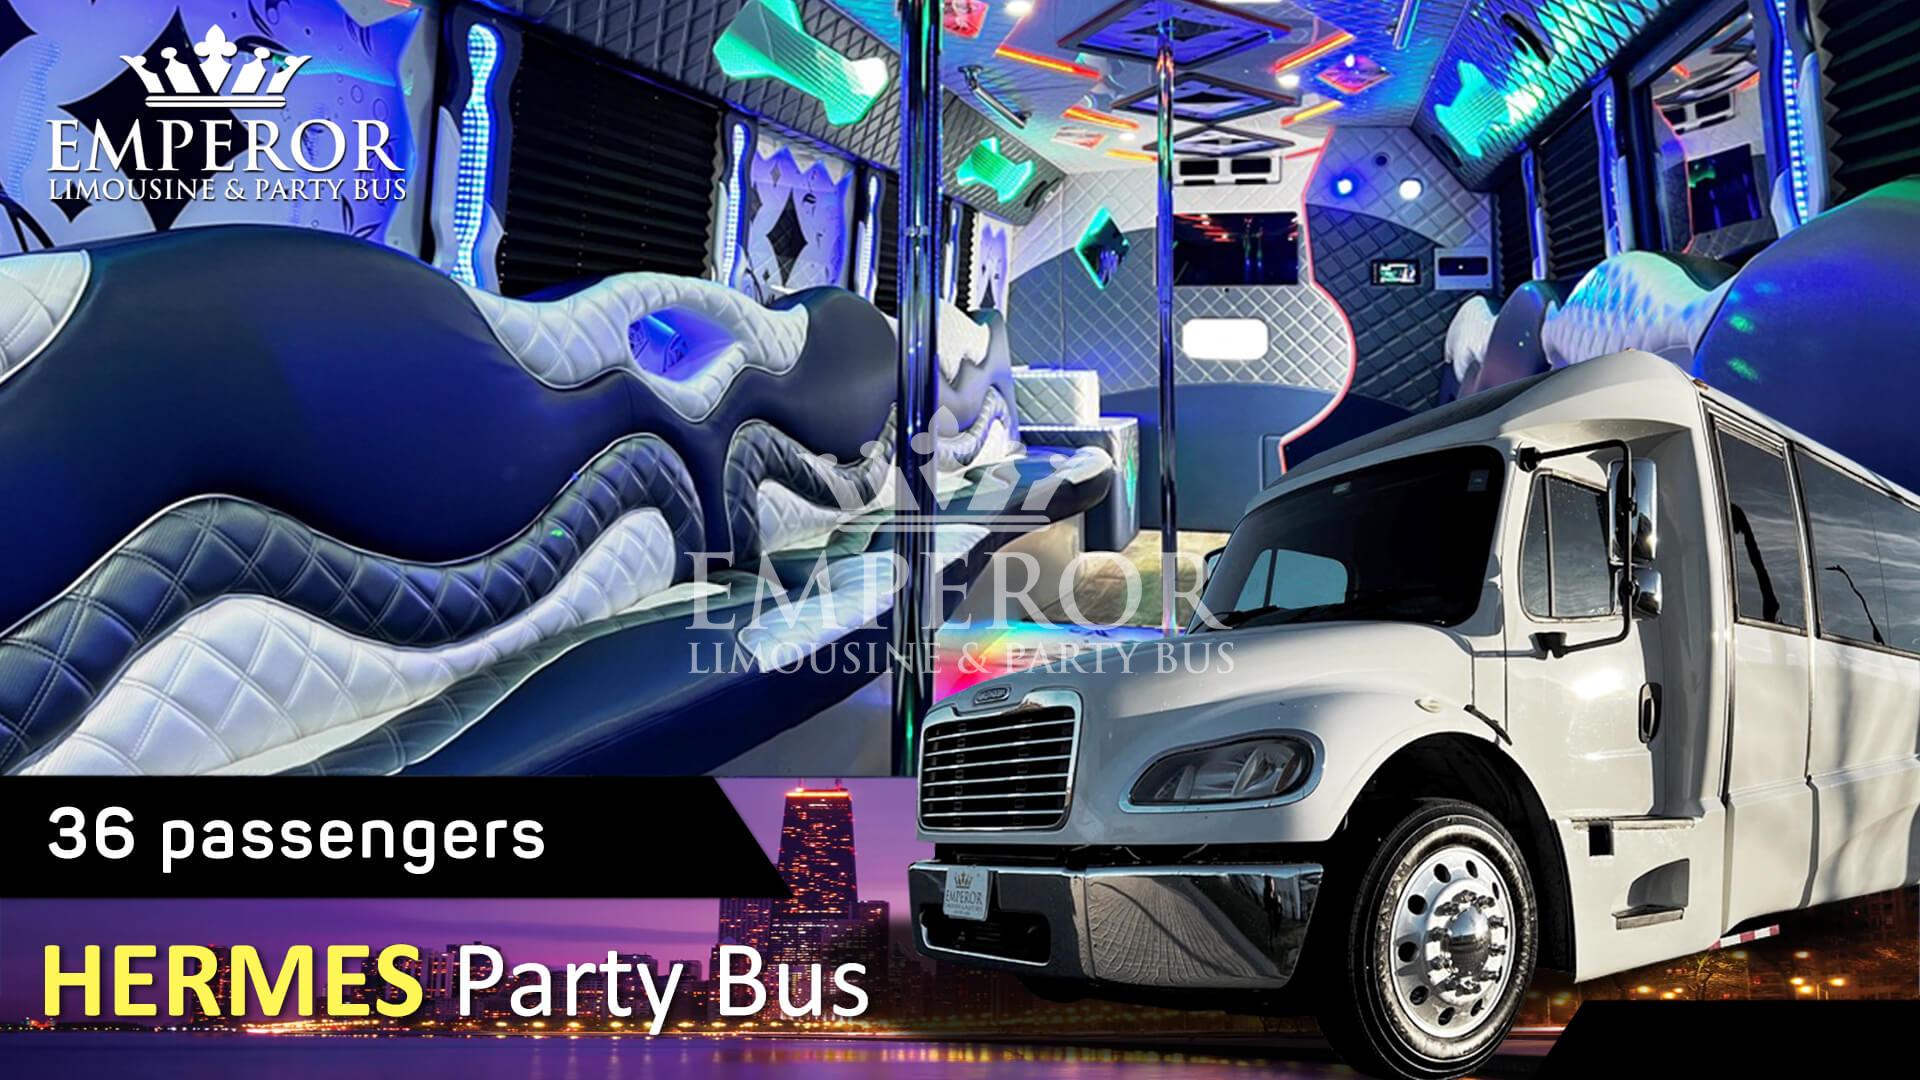 Party bus rental in Bartlett, IL - Hermes Edition